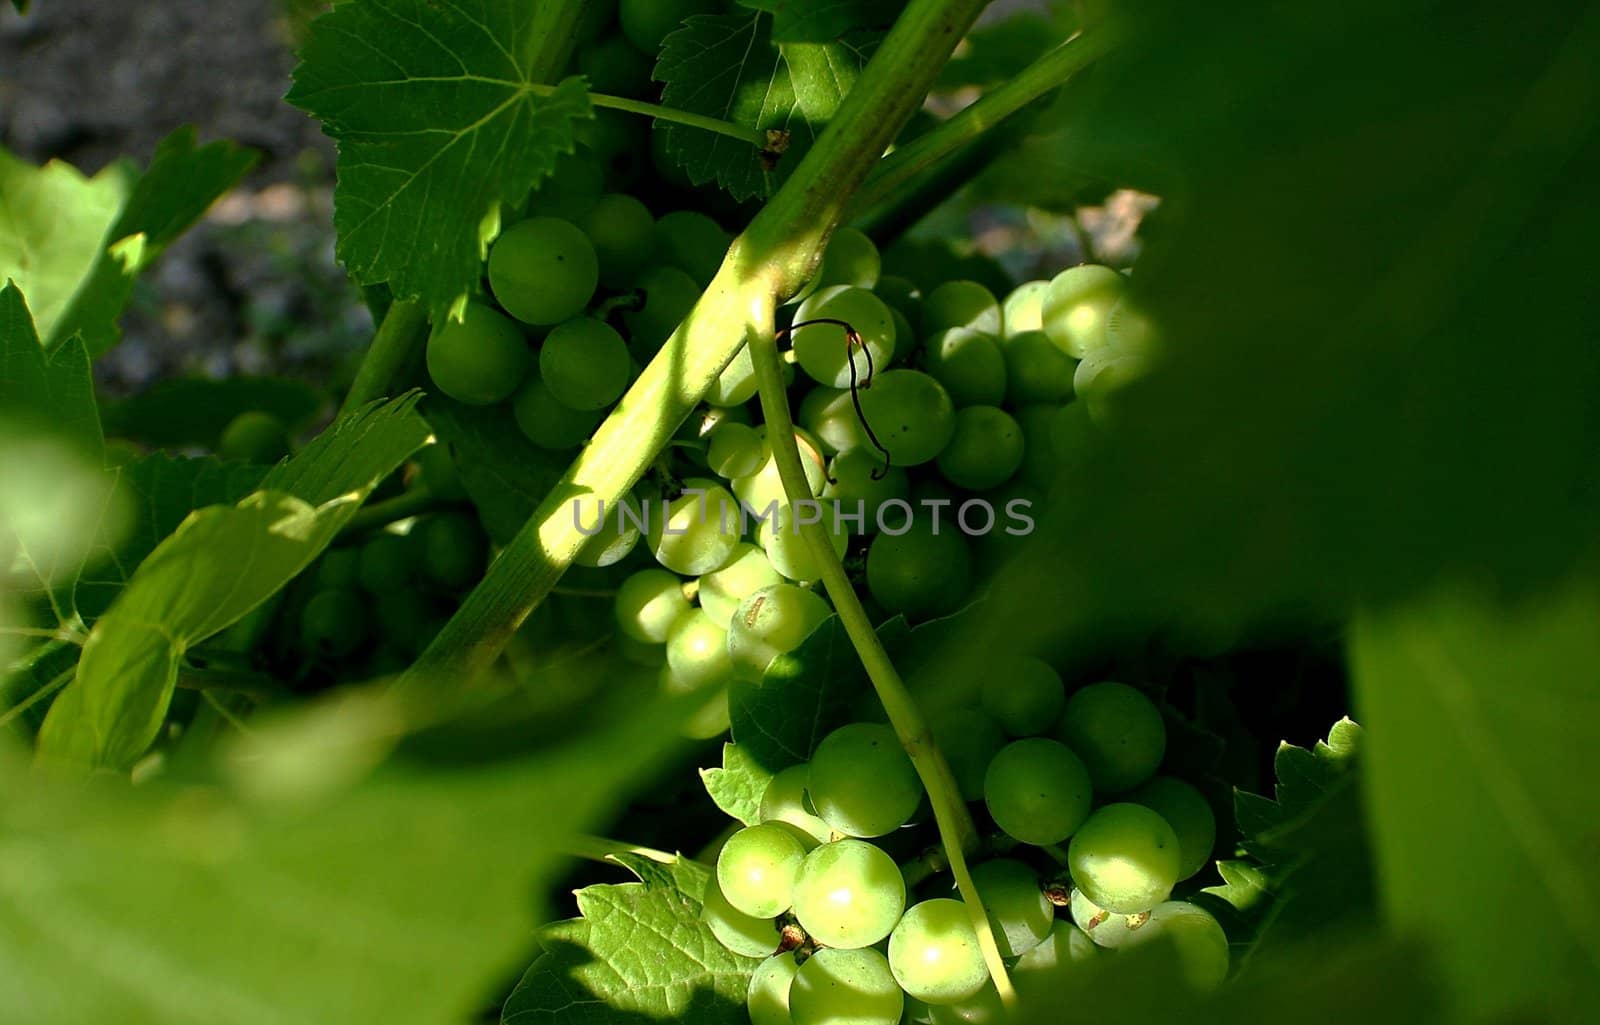 Wine making grapes hanging on a vine branch